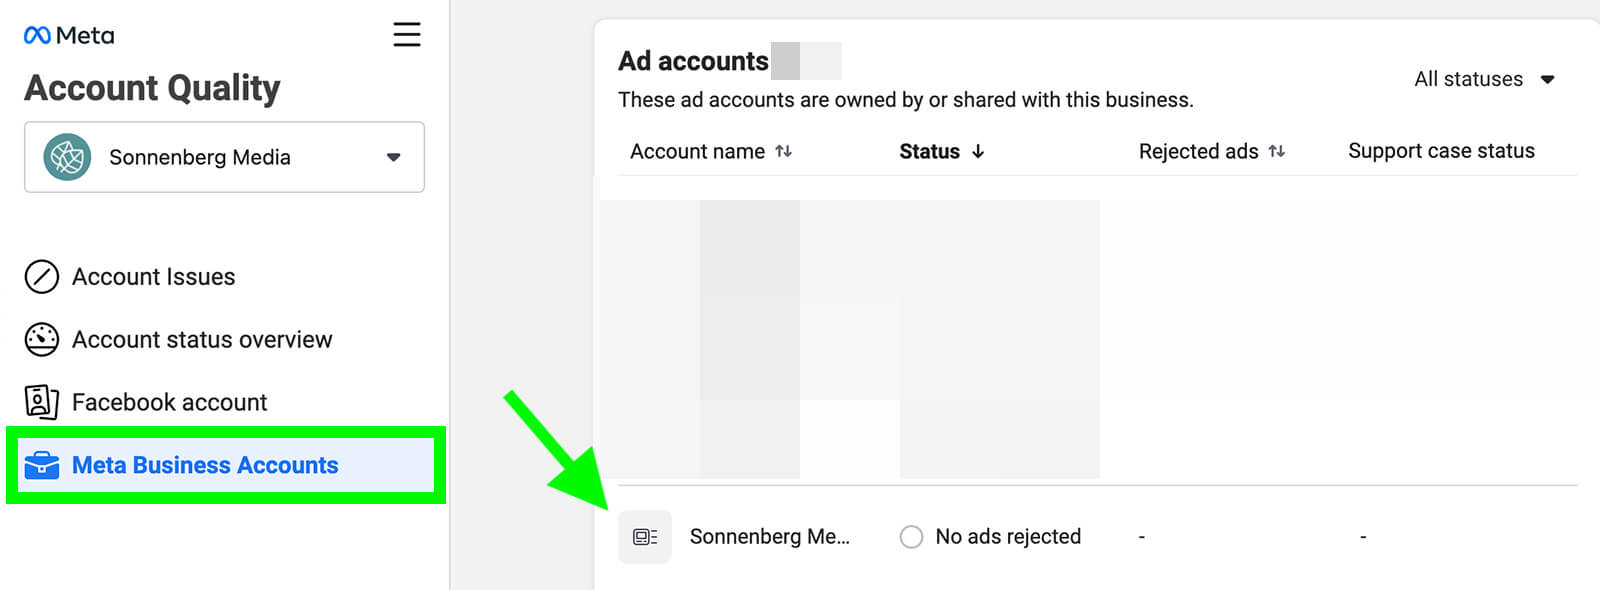 what-happens-when-your-facebook-ad-copy-uses-prohibited-words-account-quality-dashboard-ad-accounts-section-example-1